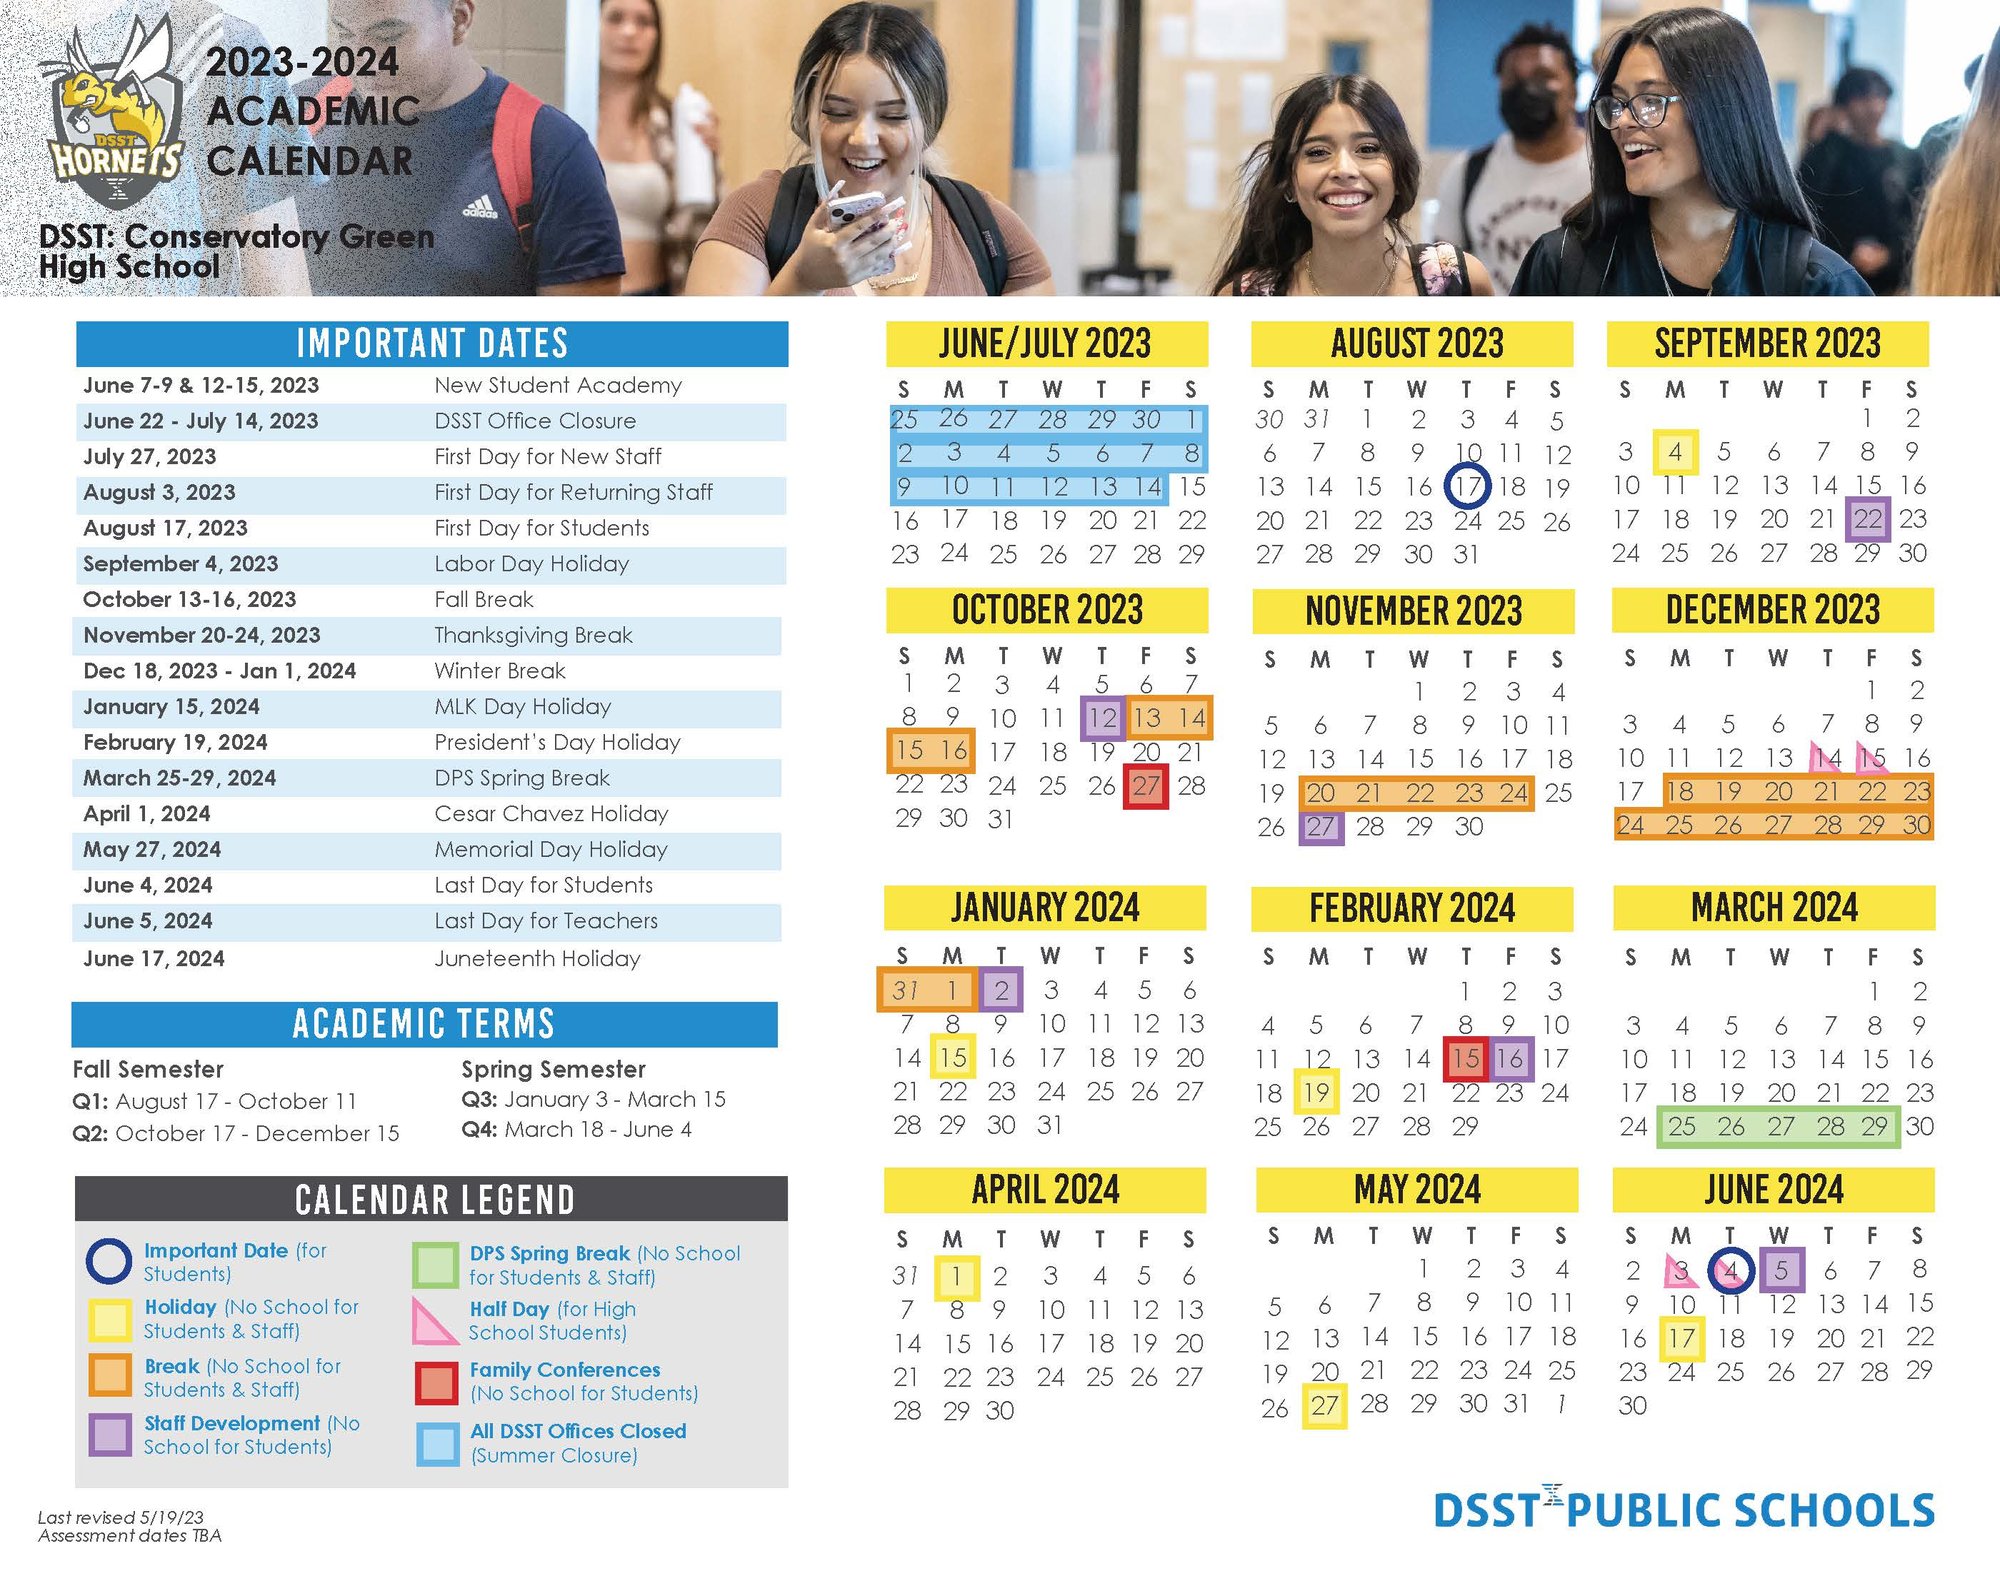 CGHS Calendar 23-24 English and Spanish Updated 5.19.23_Page_1